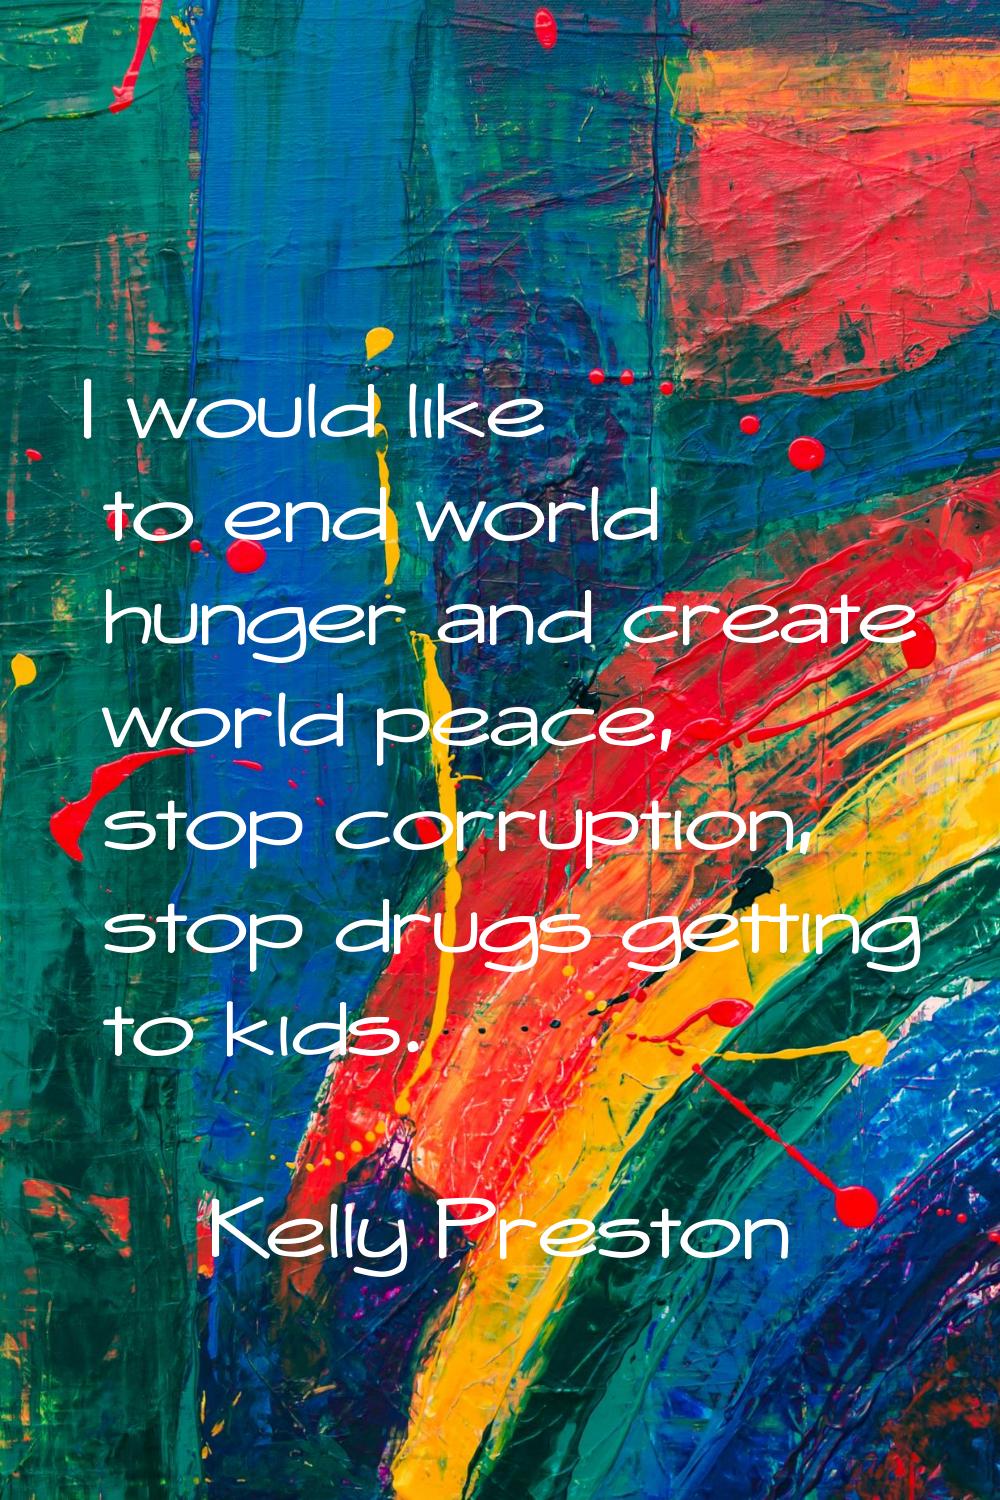 I would like to end world hunger and create world peace, stop corruption, stop drugs getting to kid